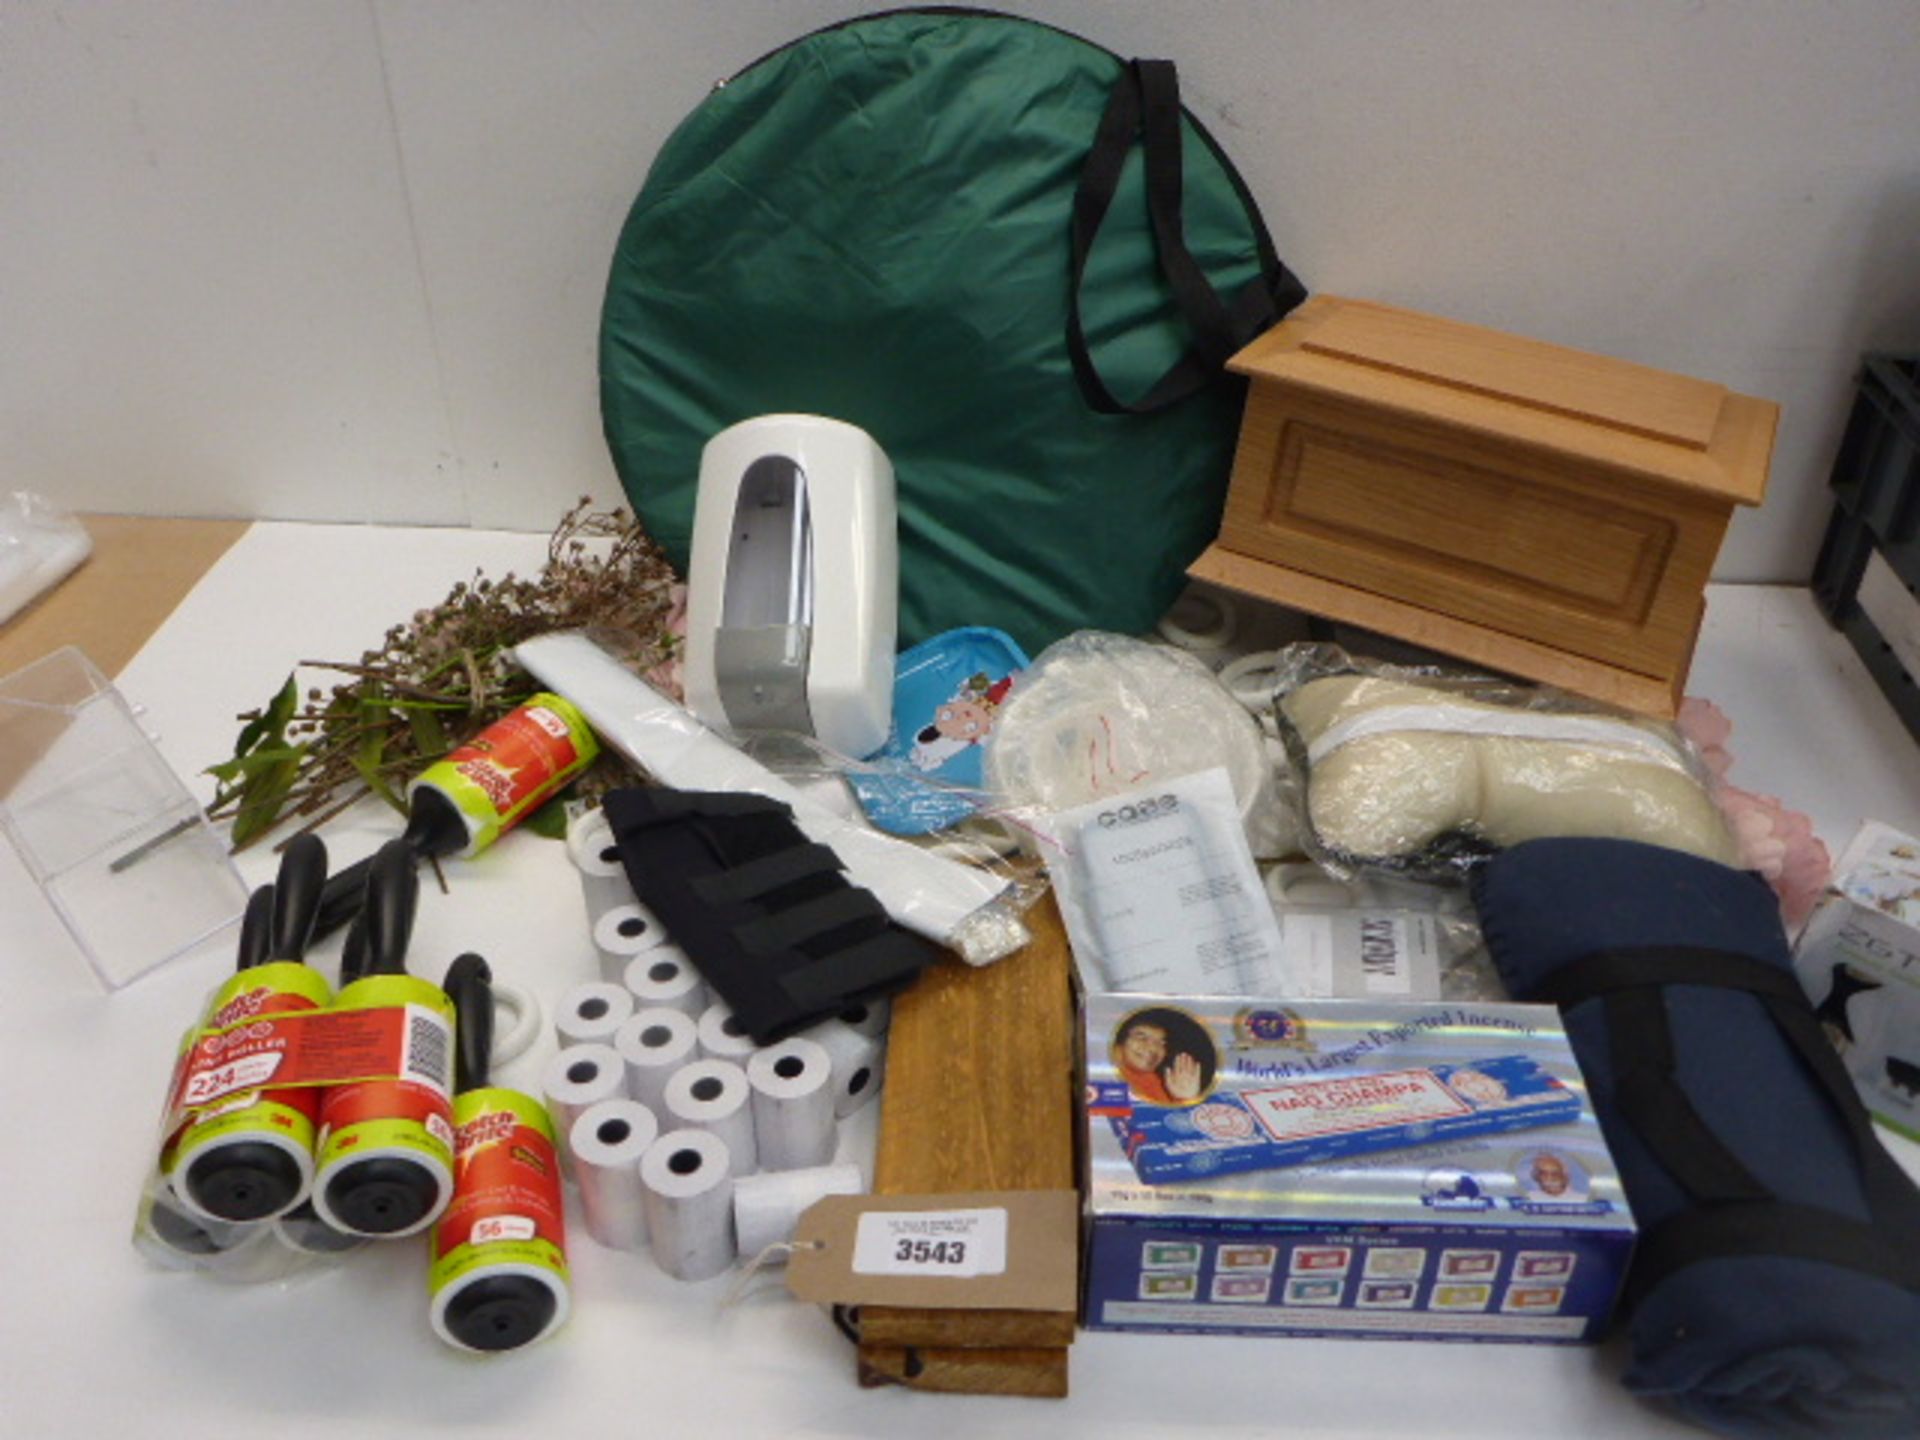 Large bag of household sundries including wooden box, incense, toothpaste dispenser, picnic blanket,